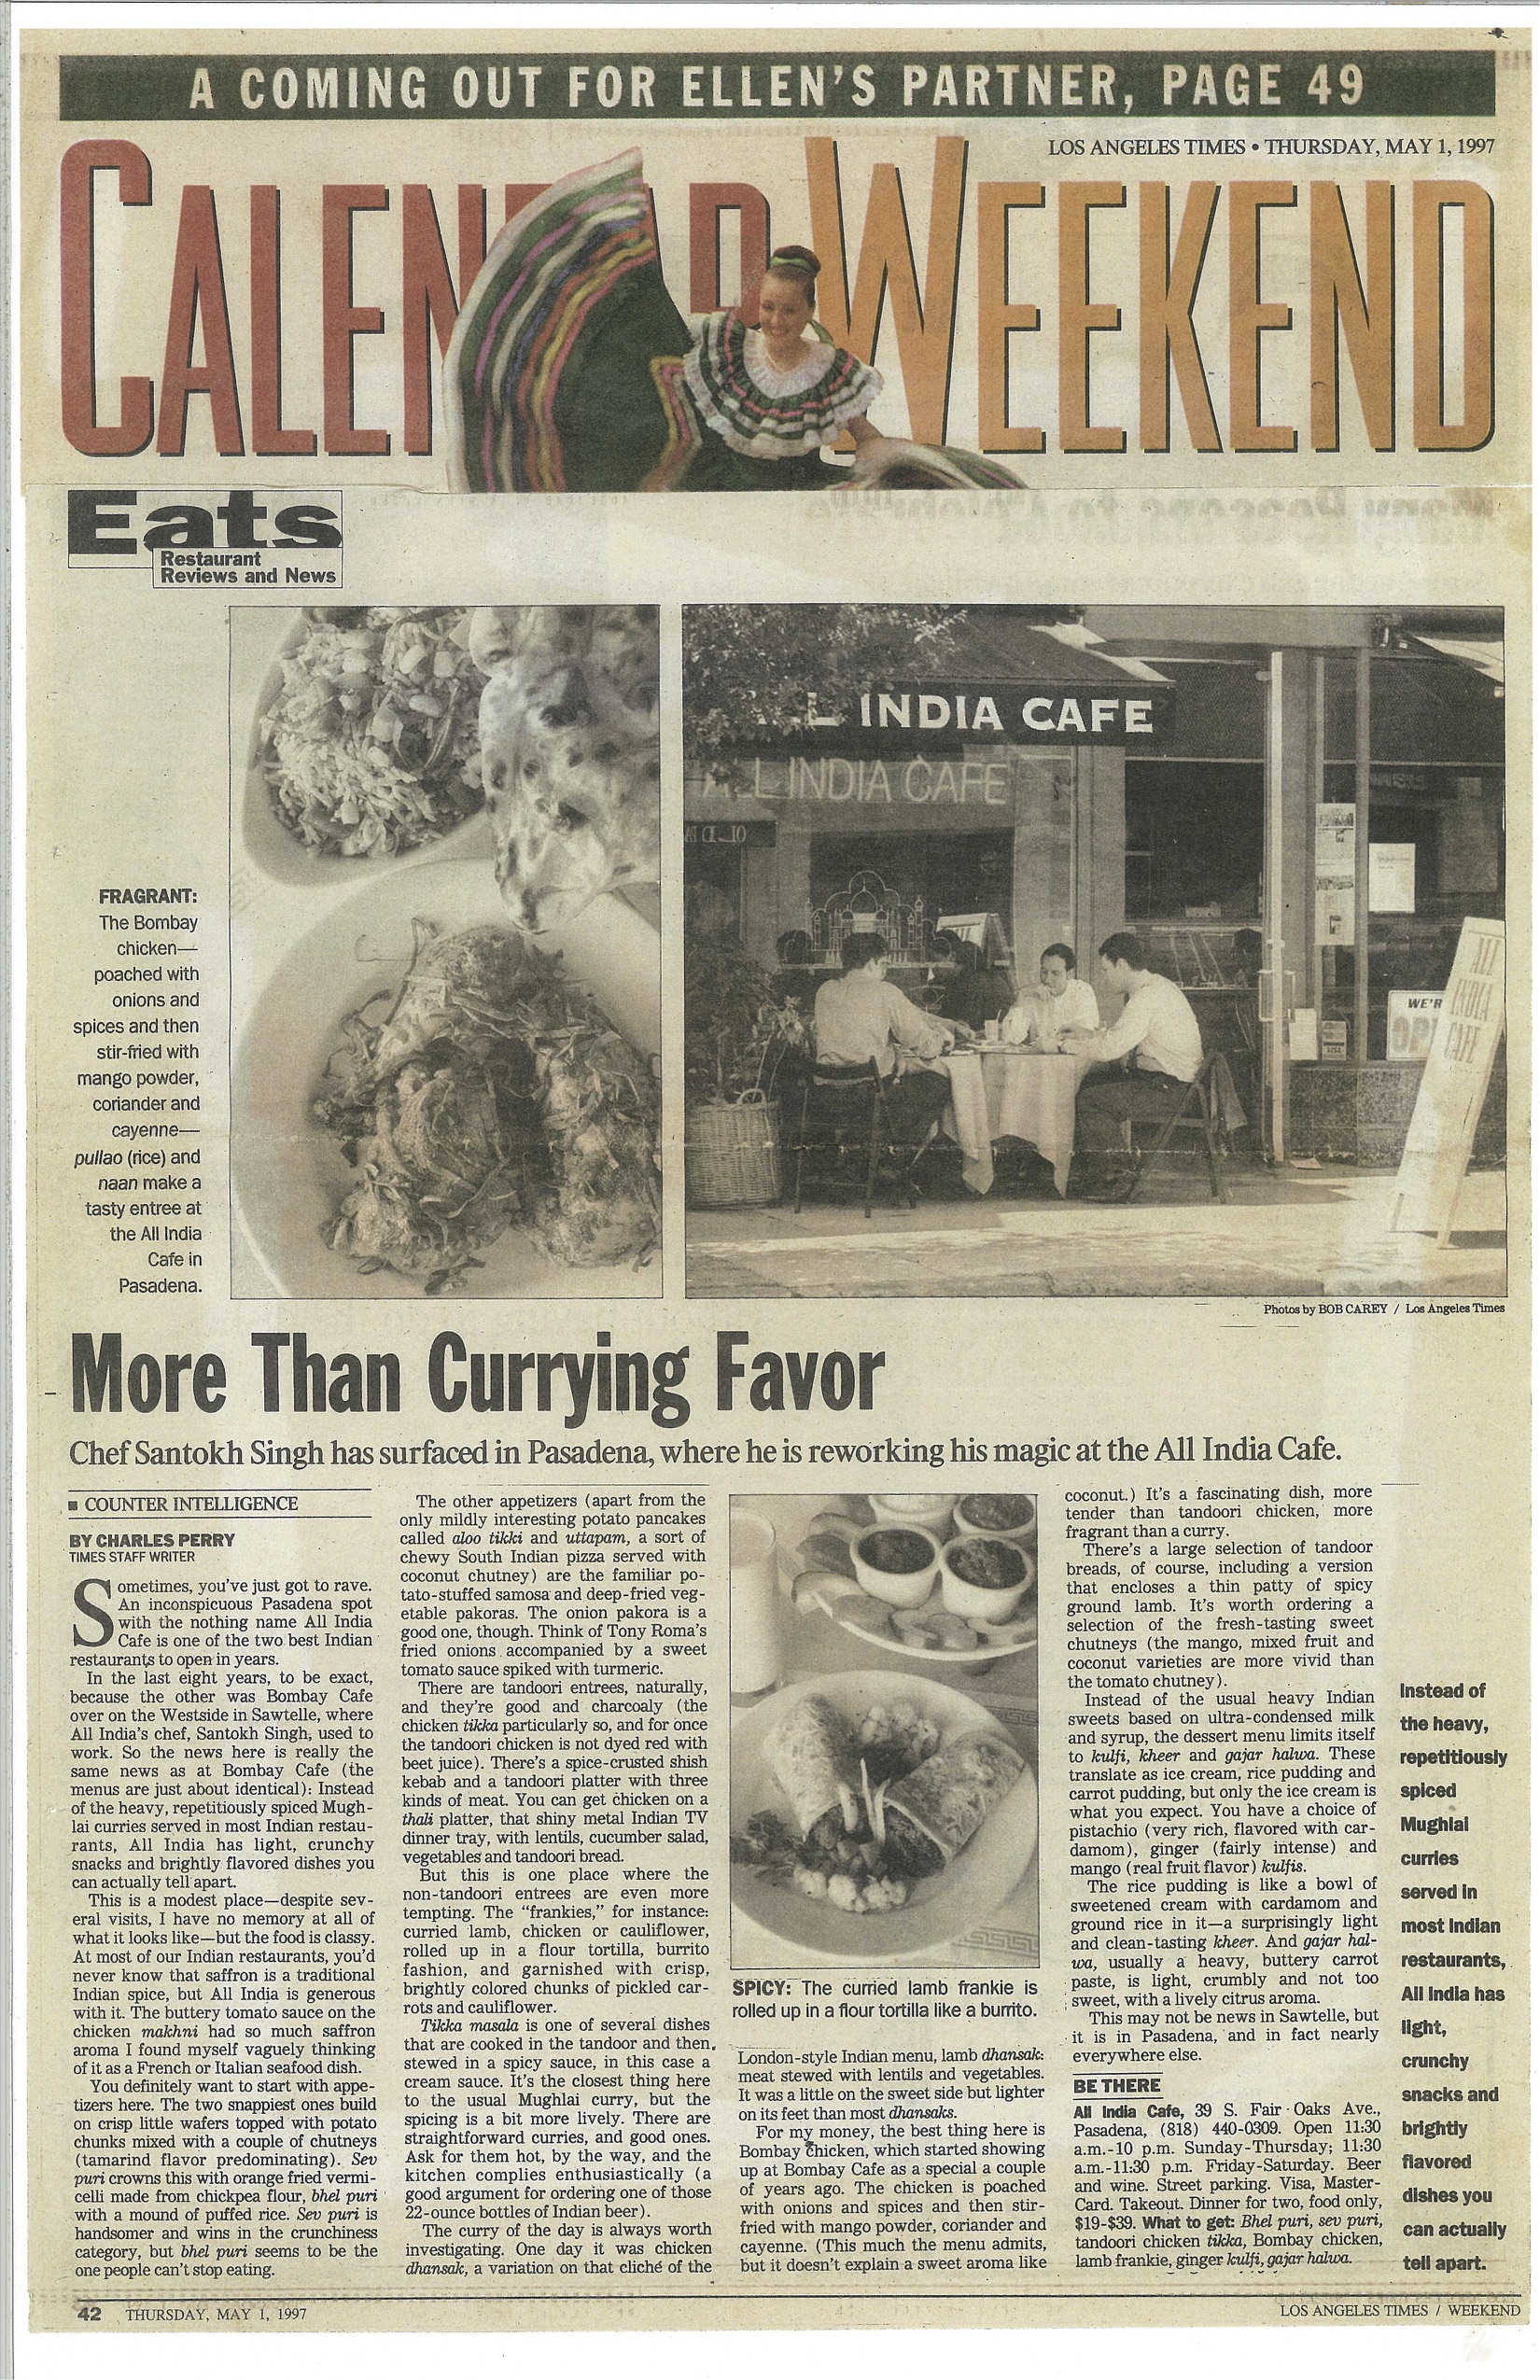  Another press clipping of All India Cafe featured in the calendar weekend section of the Los Angeles Times.  